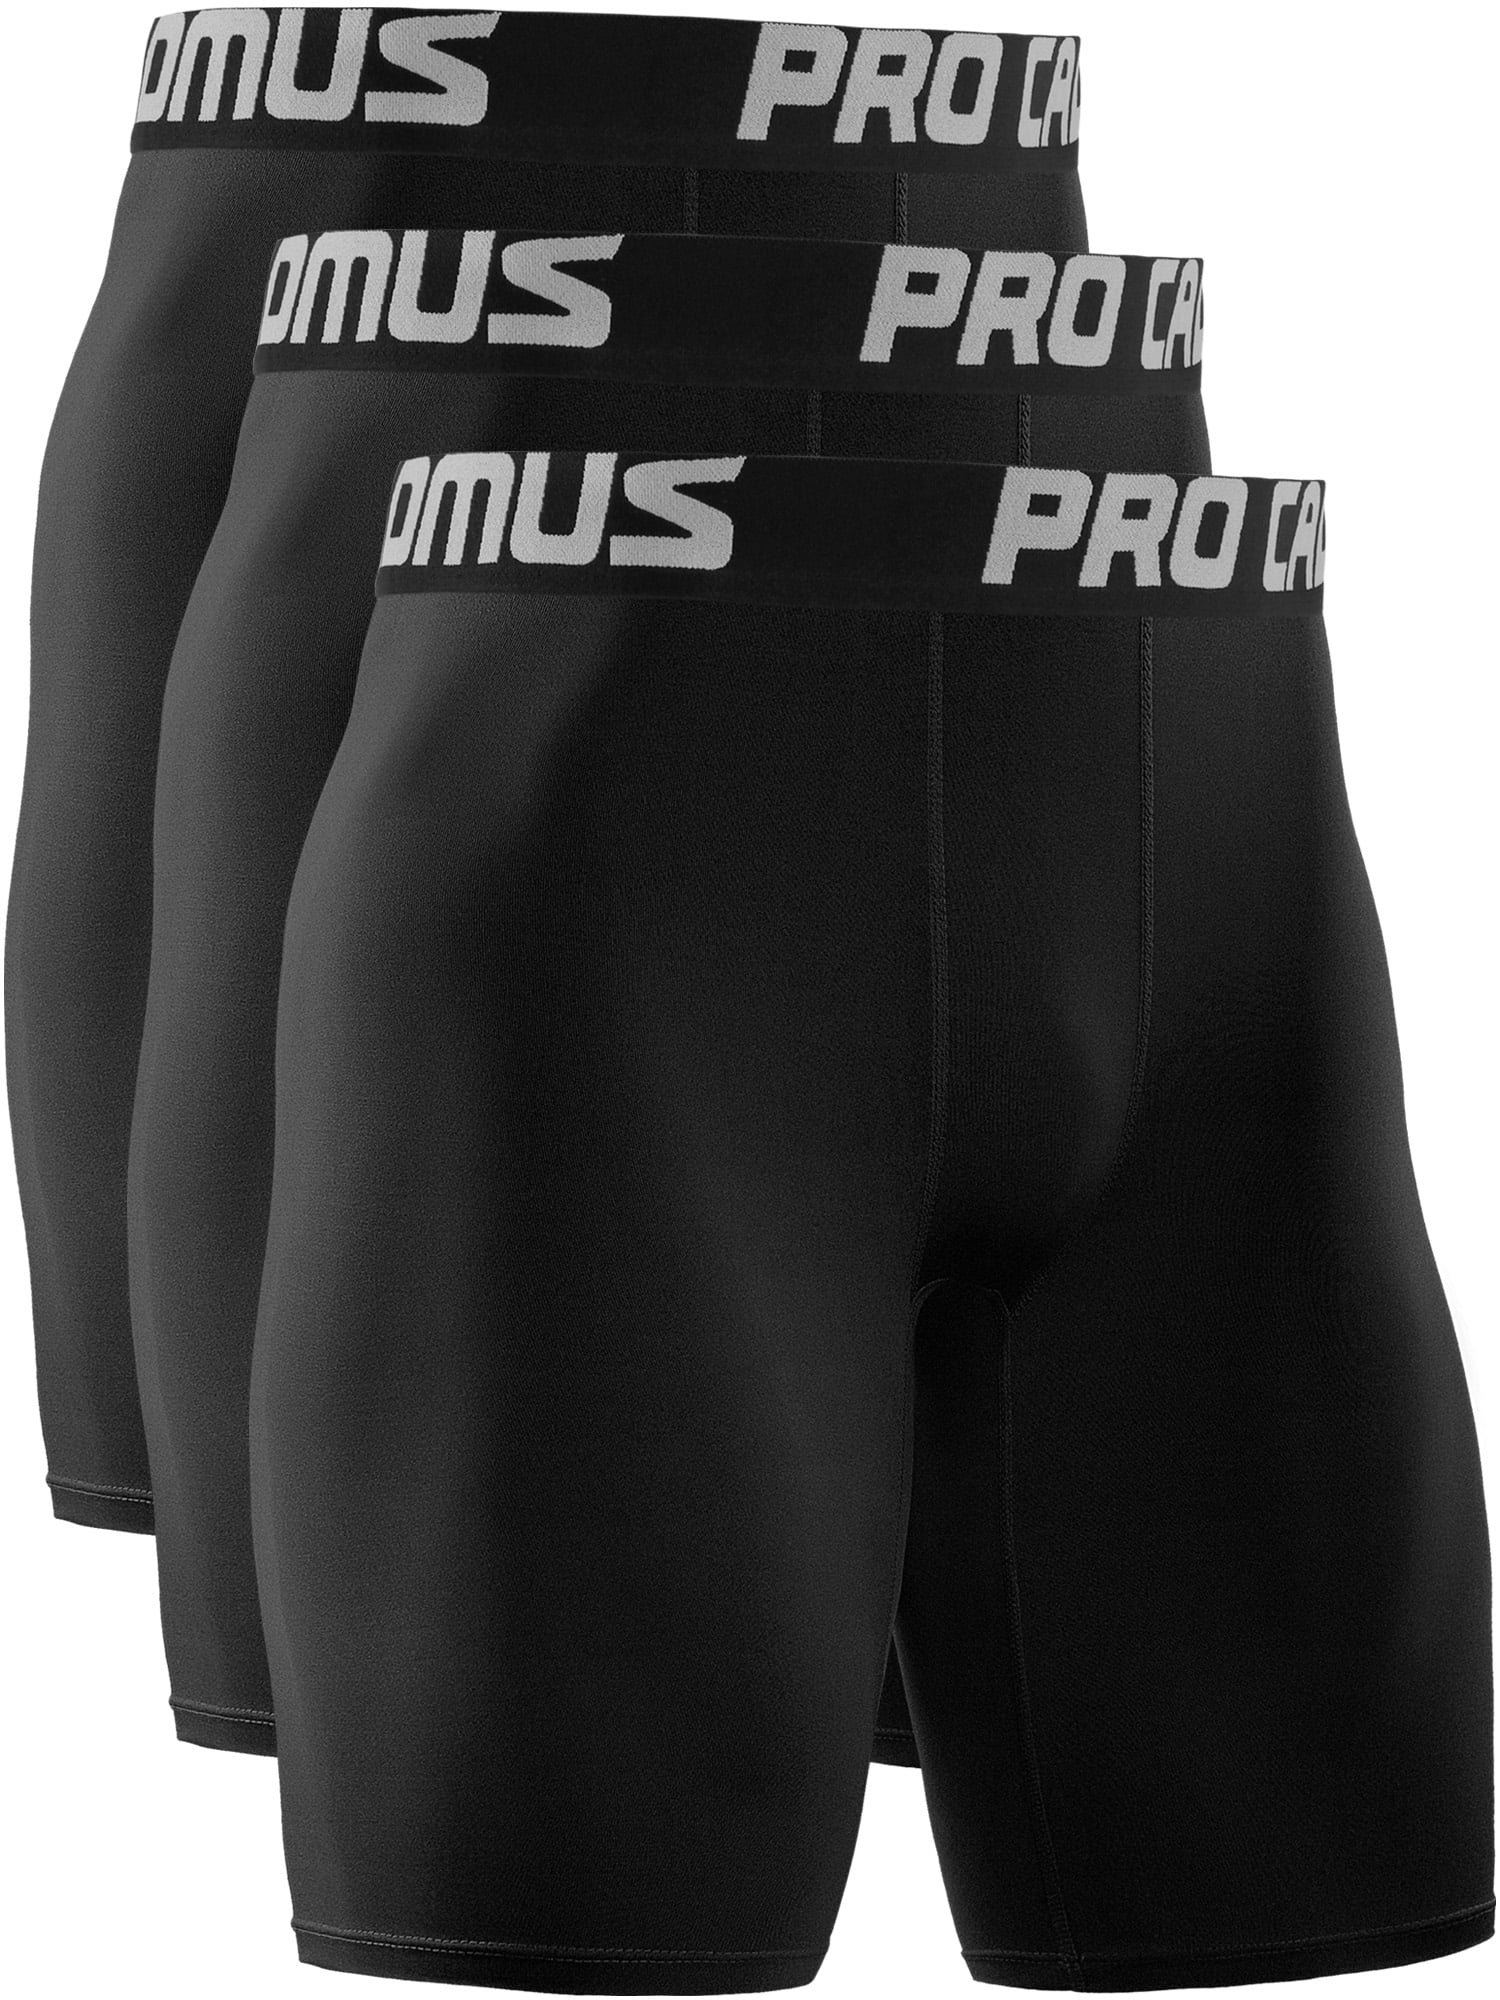 Cadmus Men's Running Compression Shorts Athletic Workout